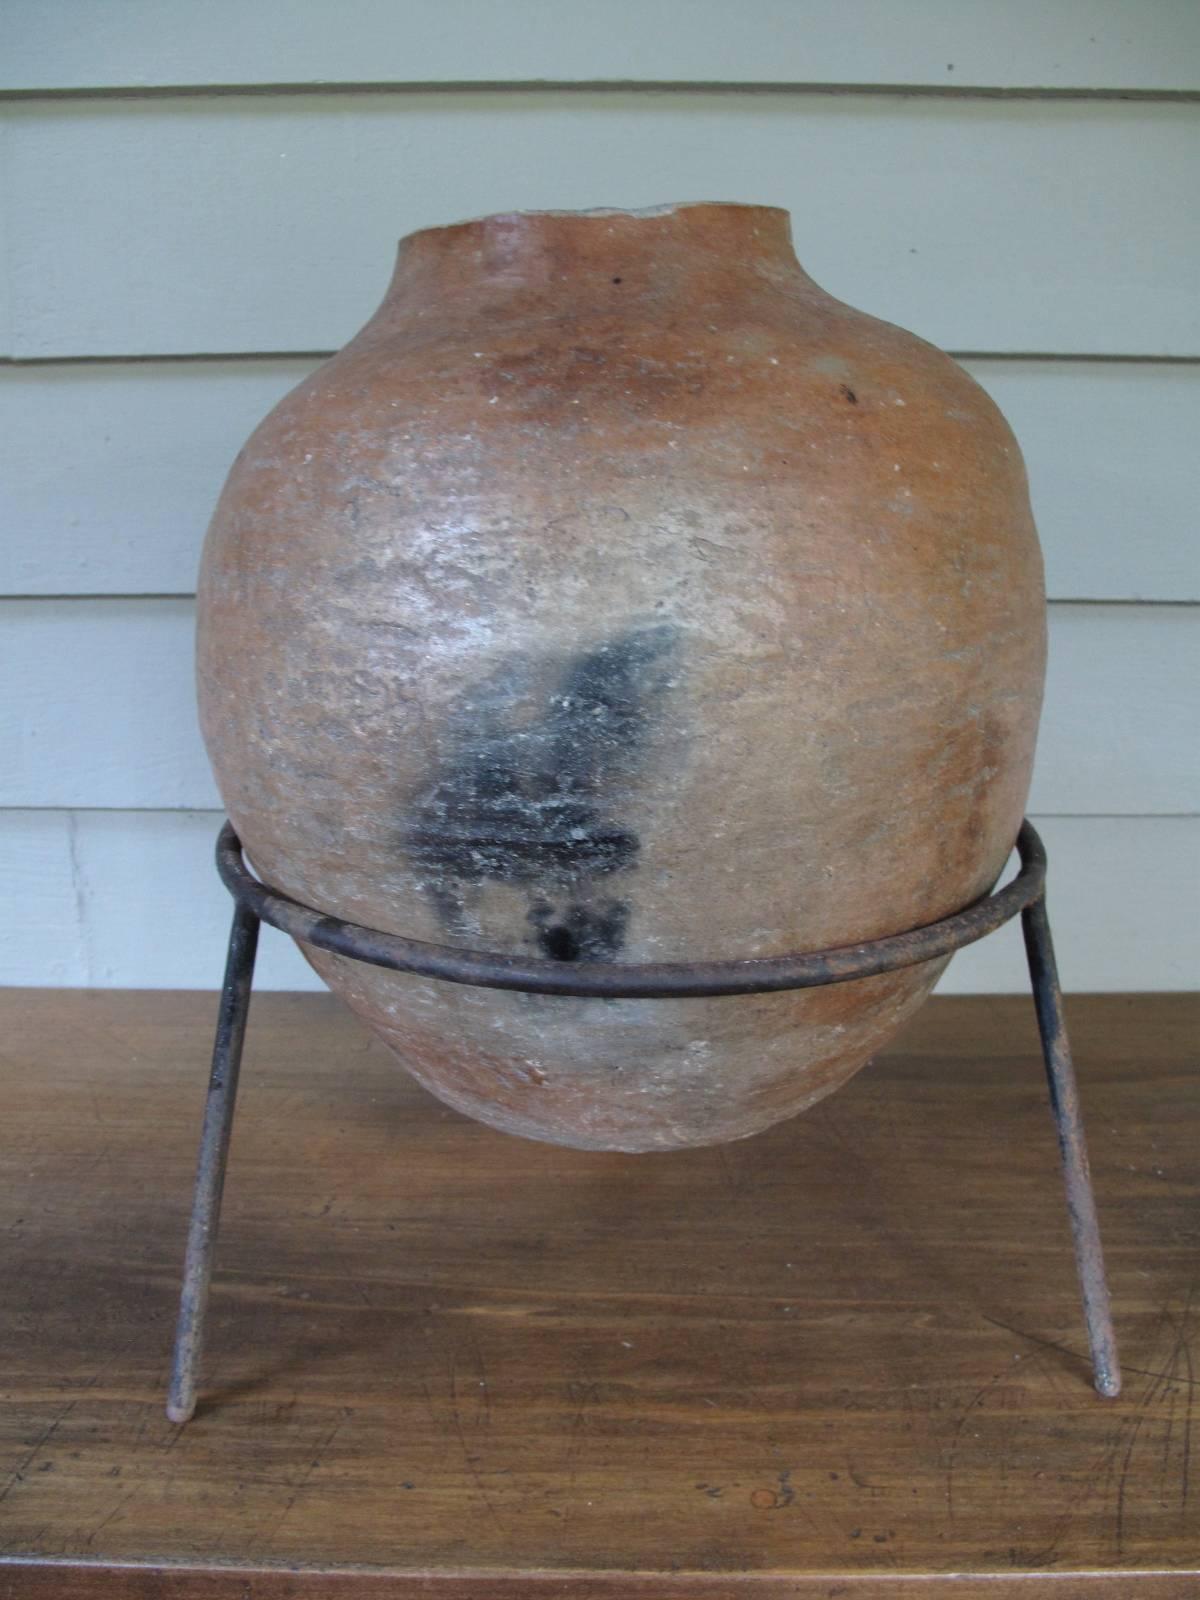 Handmade wide mouth terra cotta vase. Sits in round iron stand with three legs.